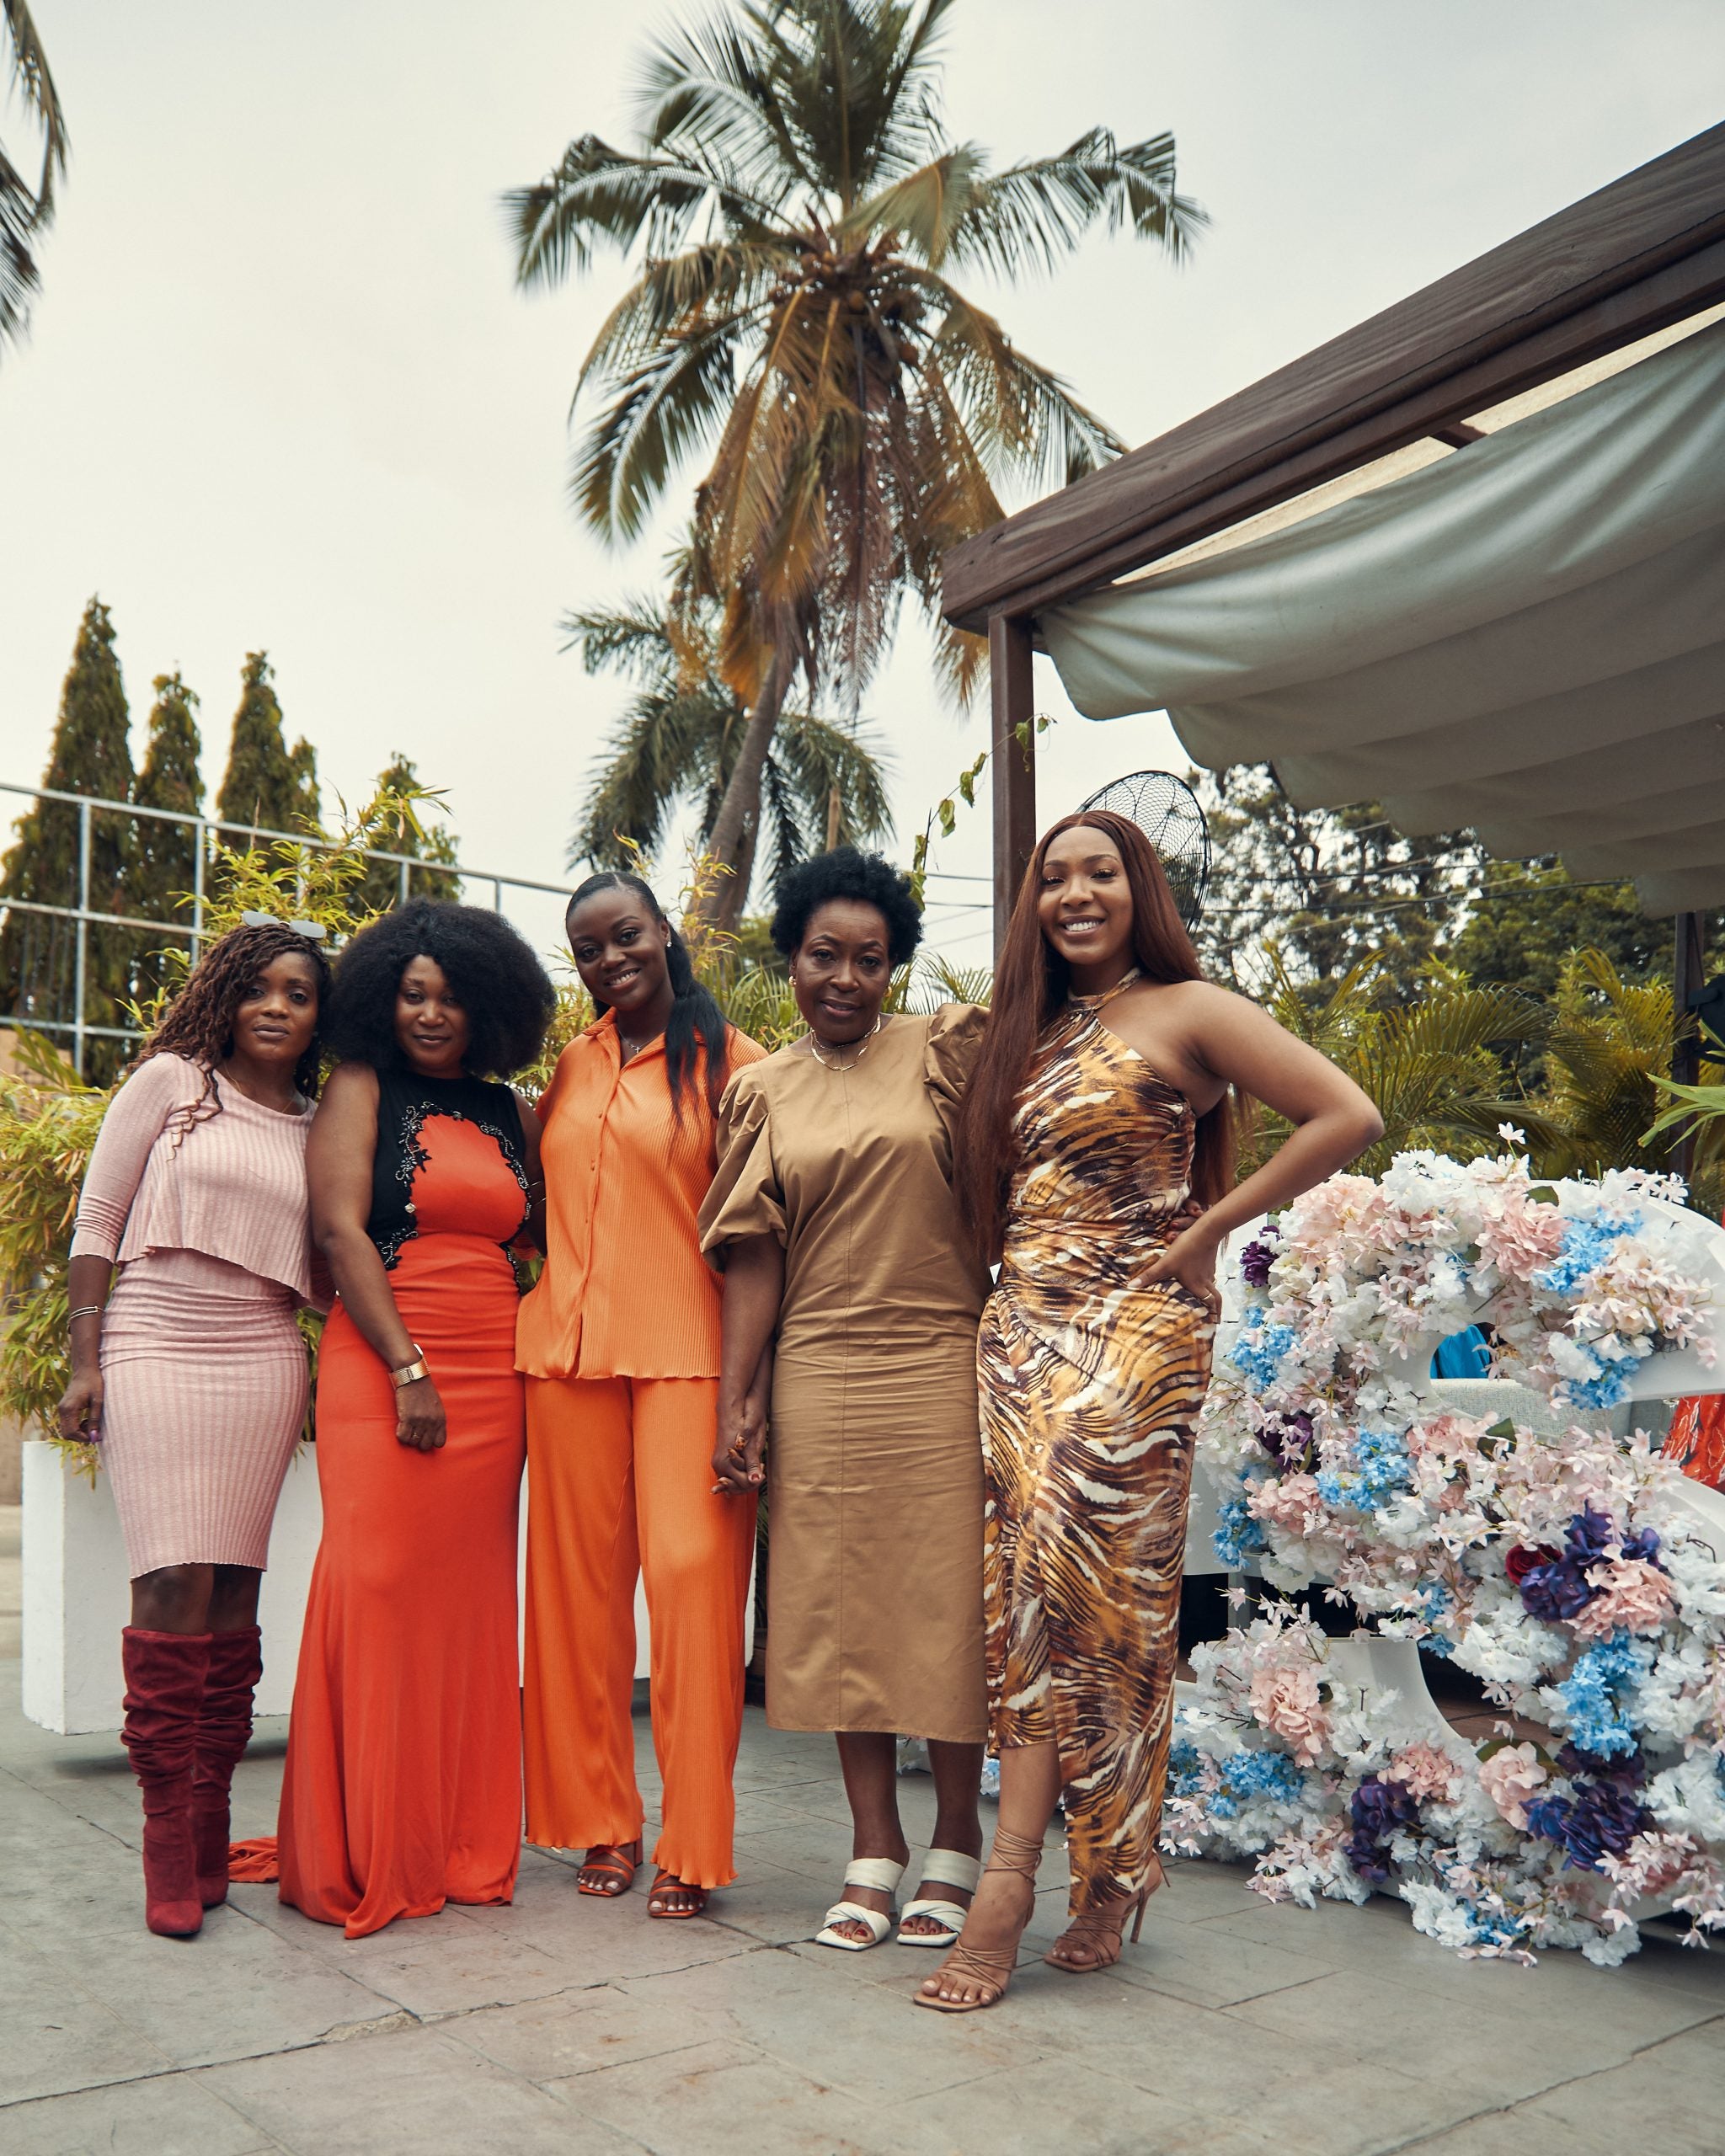 A Celebration For The Ages, Sip N' Slay Ghana Was Brimming With Beauty & Style